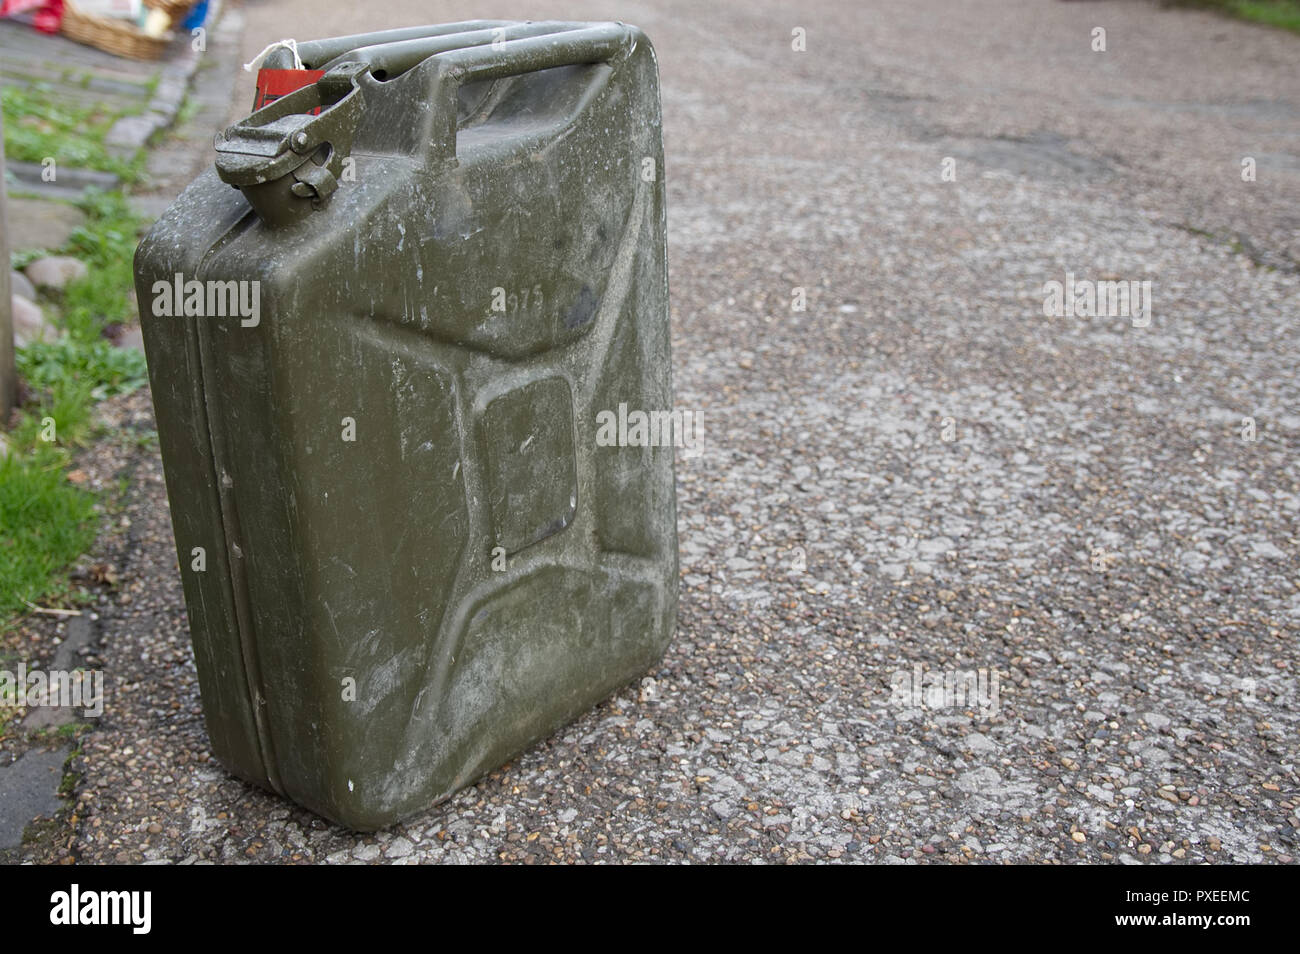 Download Jerry Can High Resolution Stock Photography And Images Alamy Yellowimages Mockups